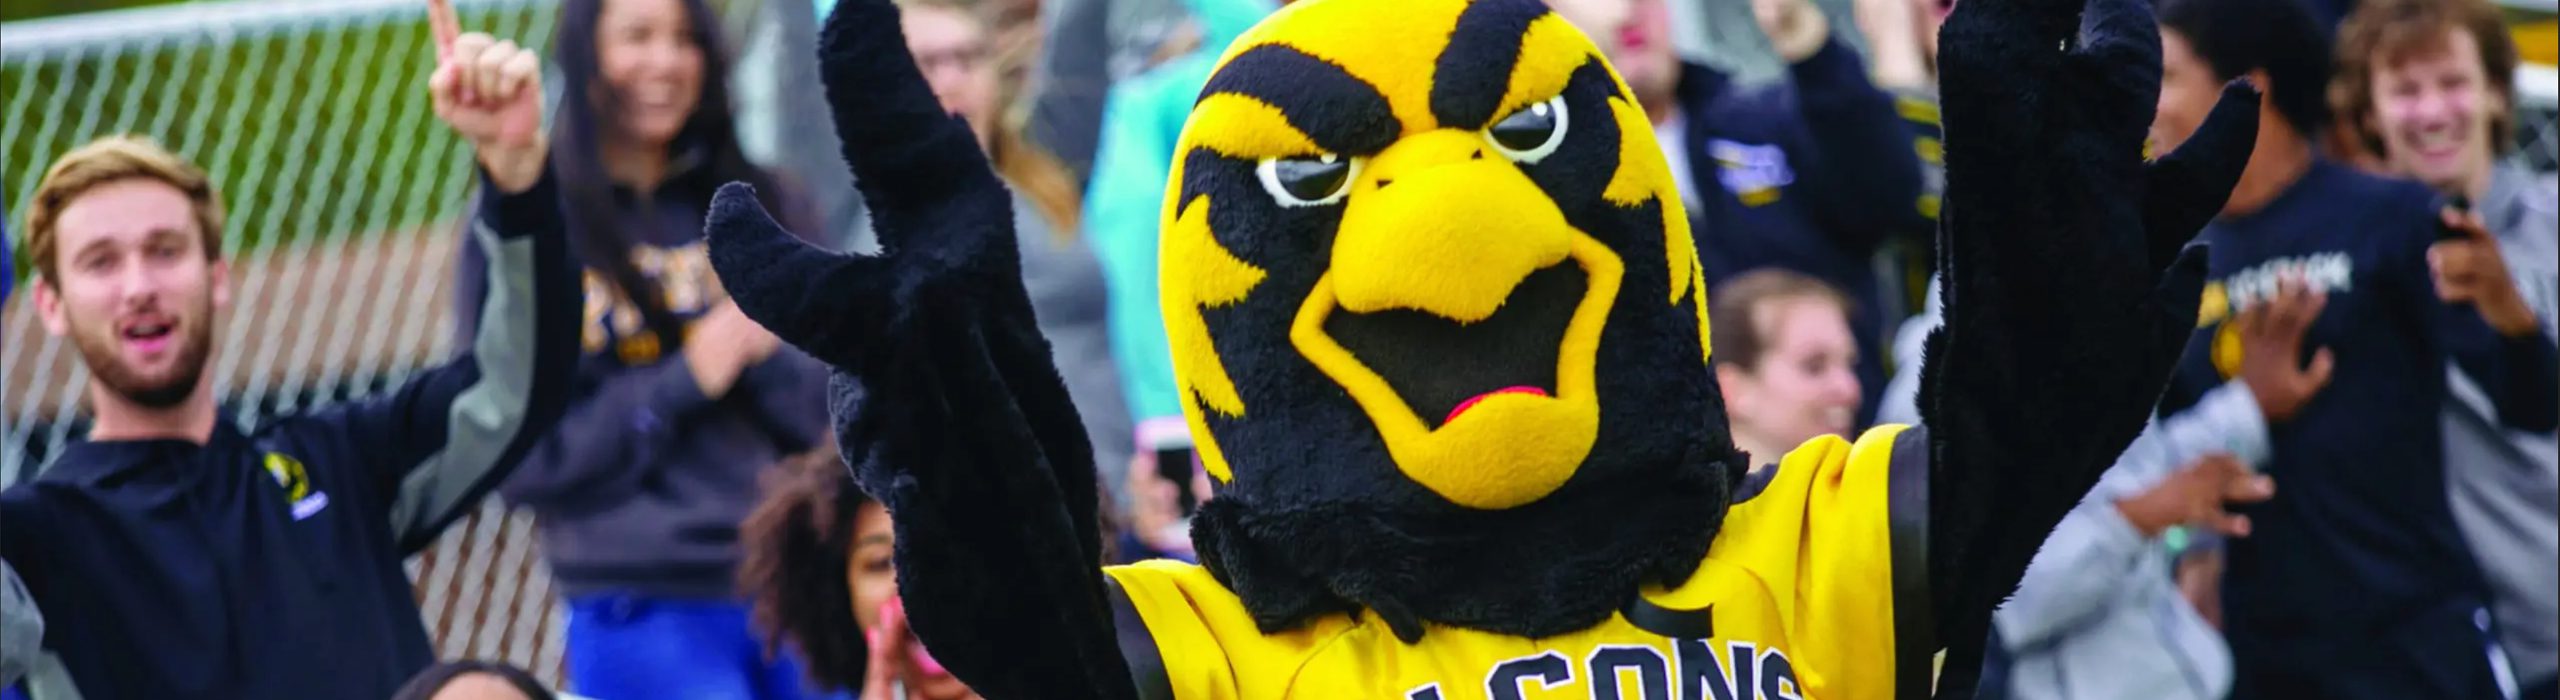 Students surrounding Pfeiffer mascot at athletic event